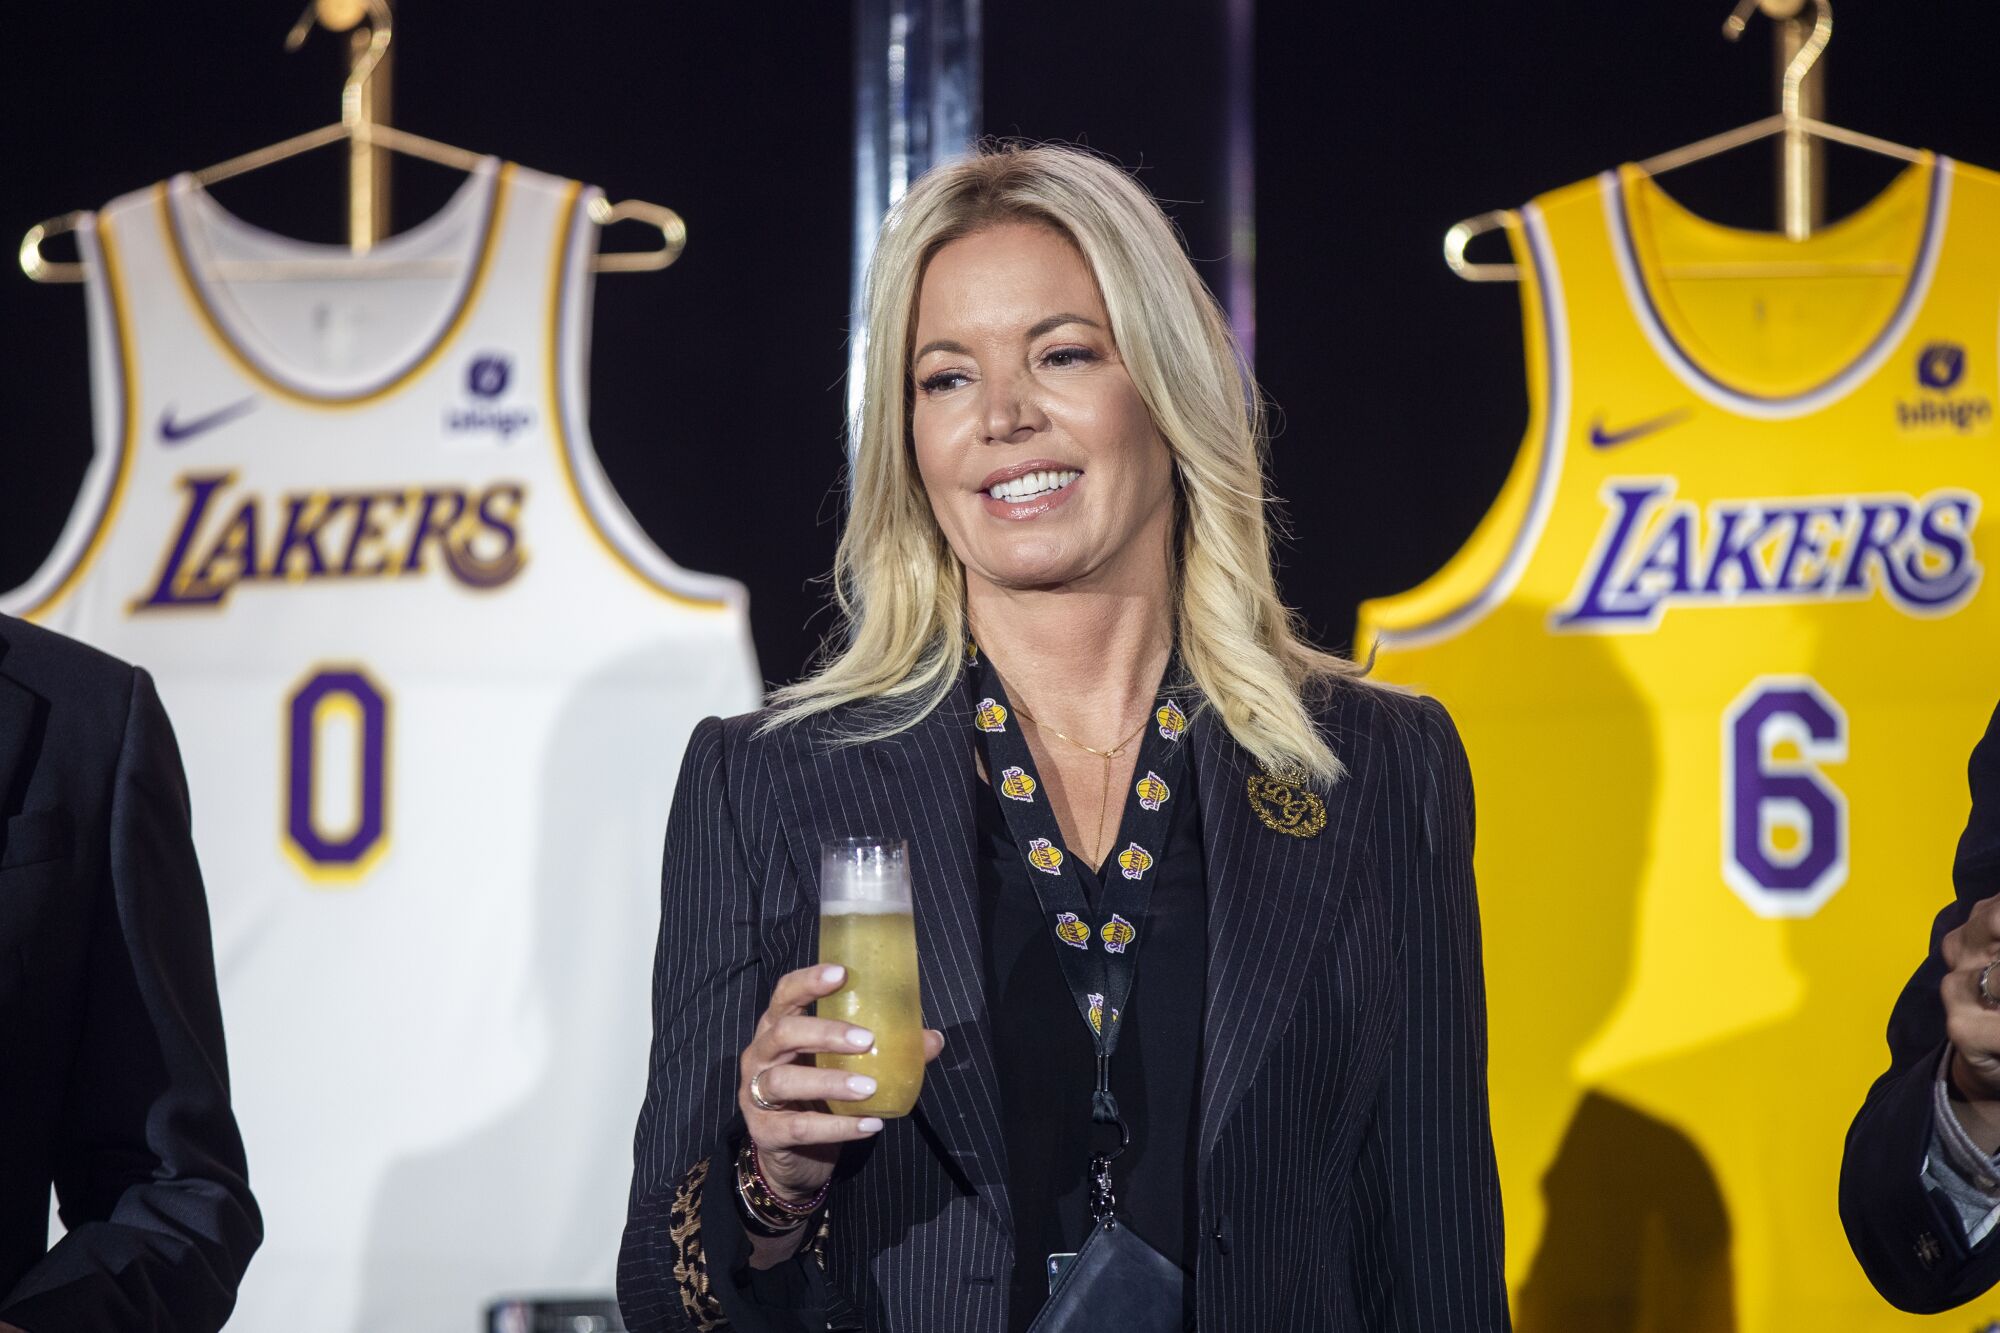 Lakers co-owner Jeanie Buss holds a glass.